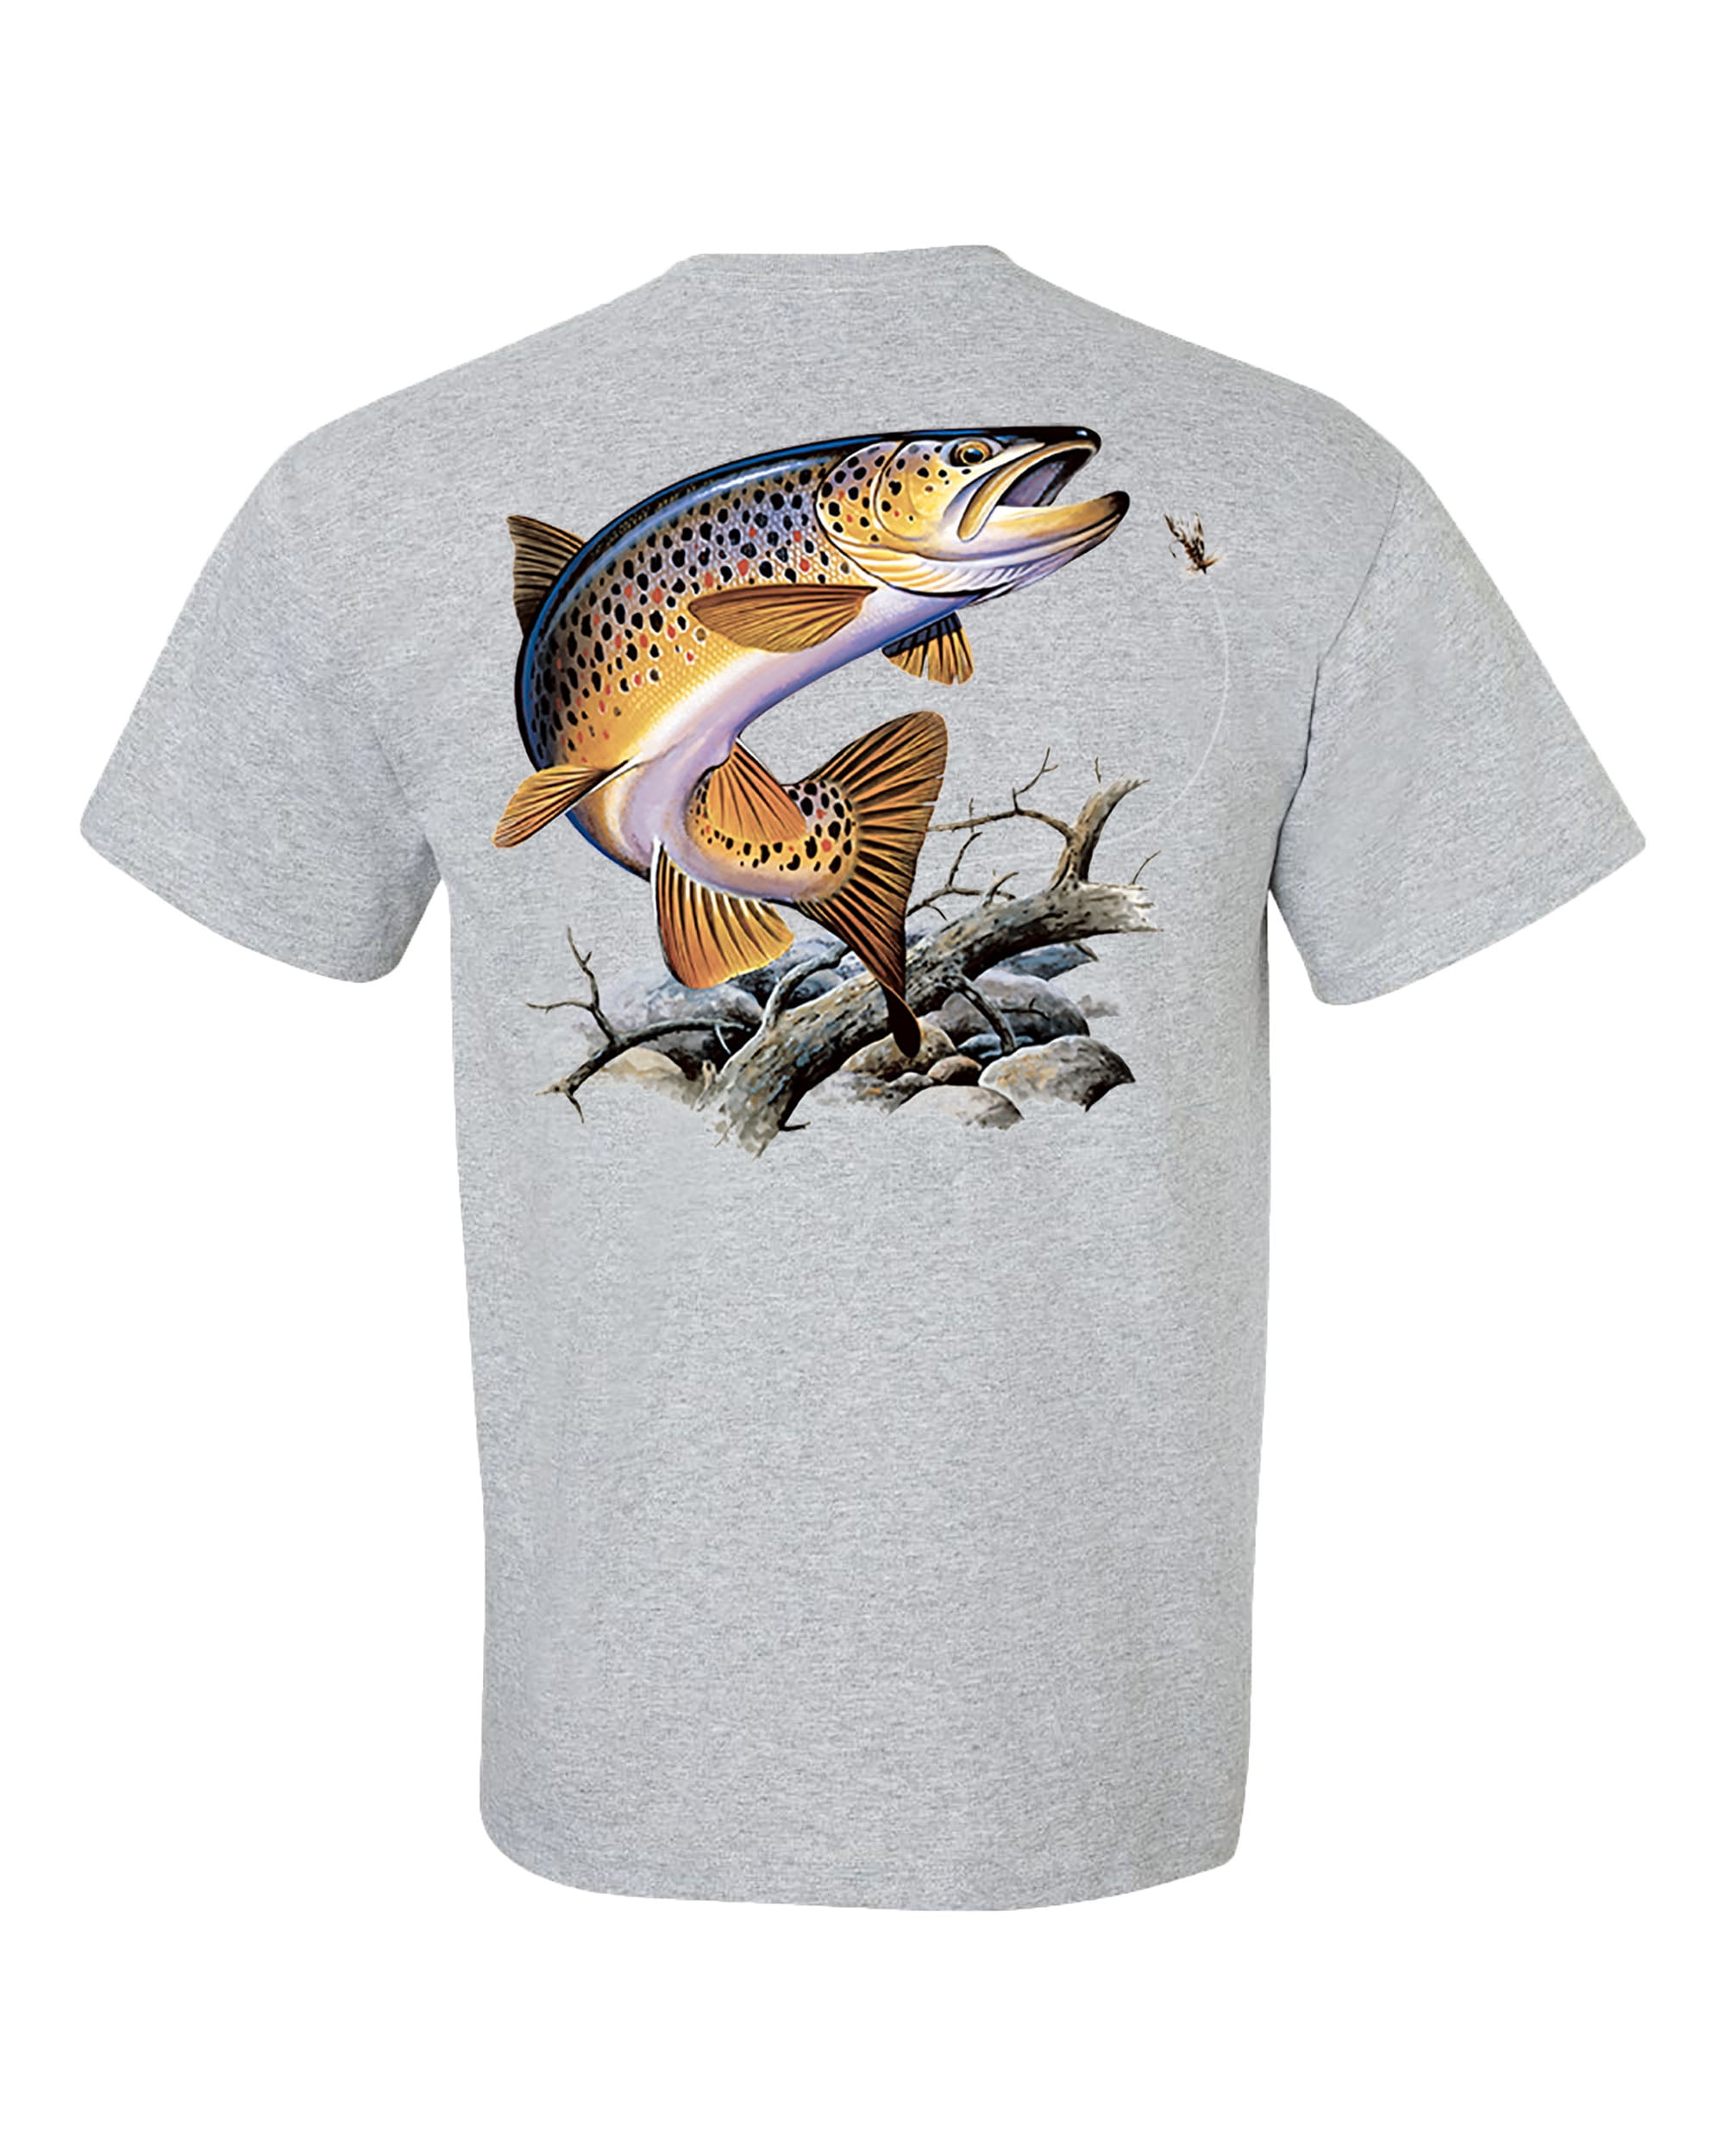 Adult Unisex Fly Fish Graphic Tee